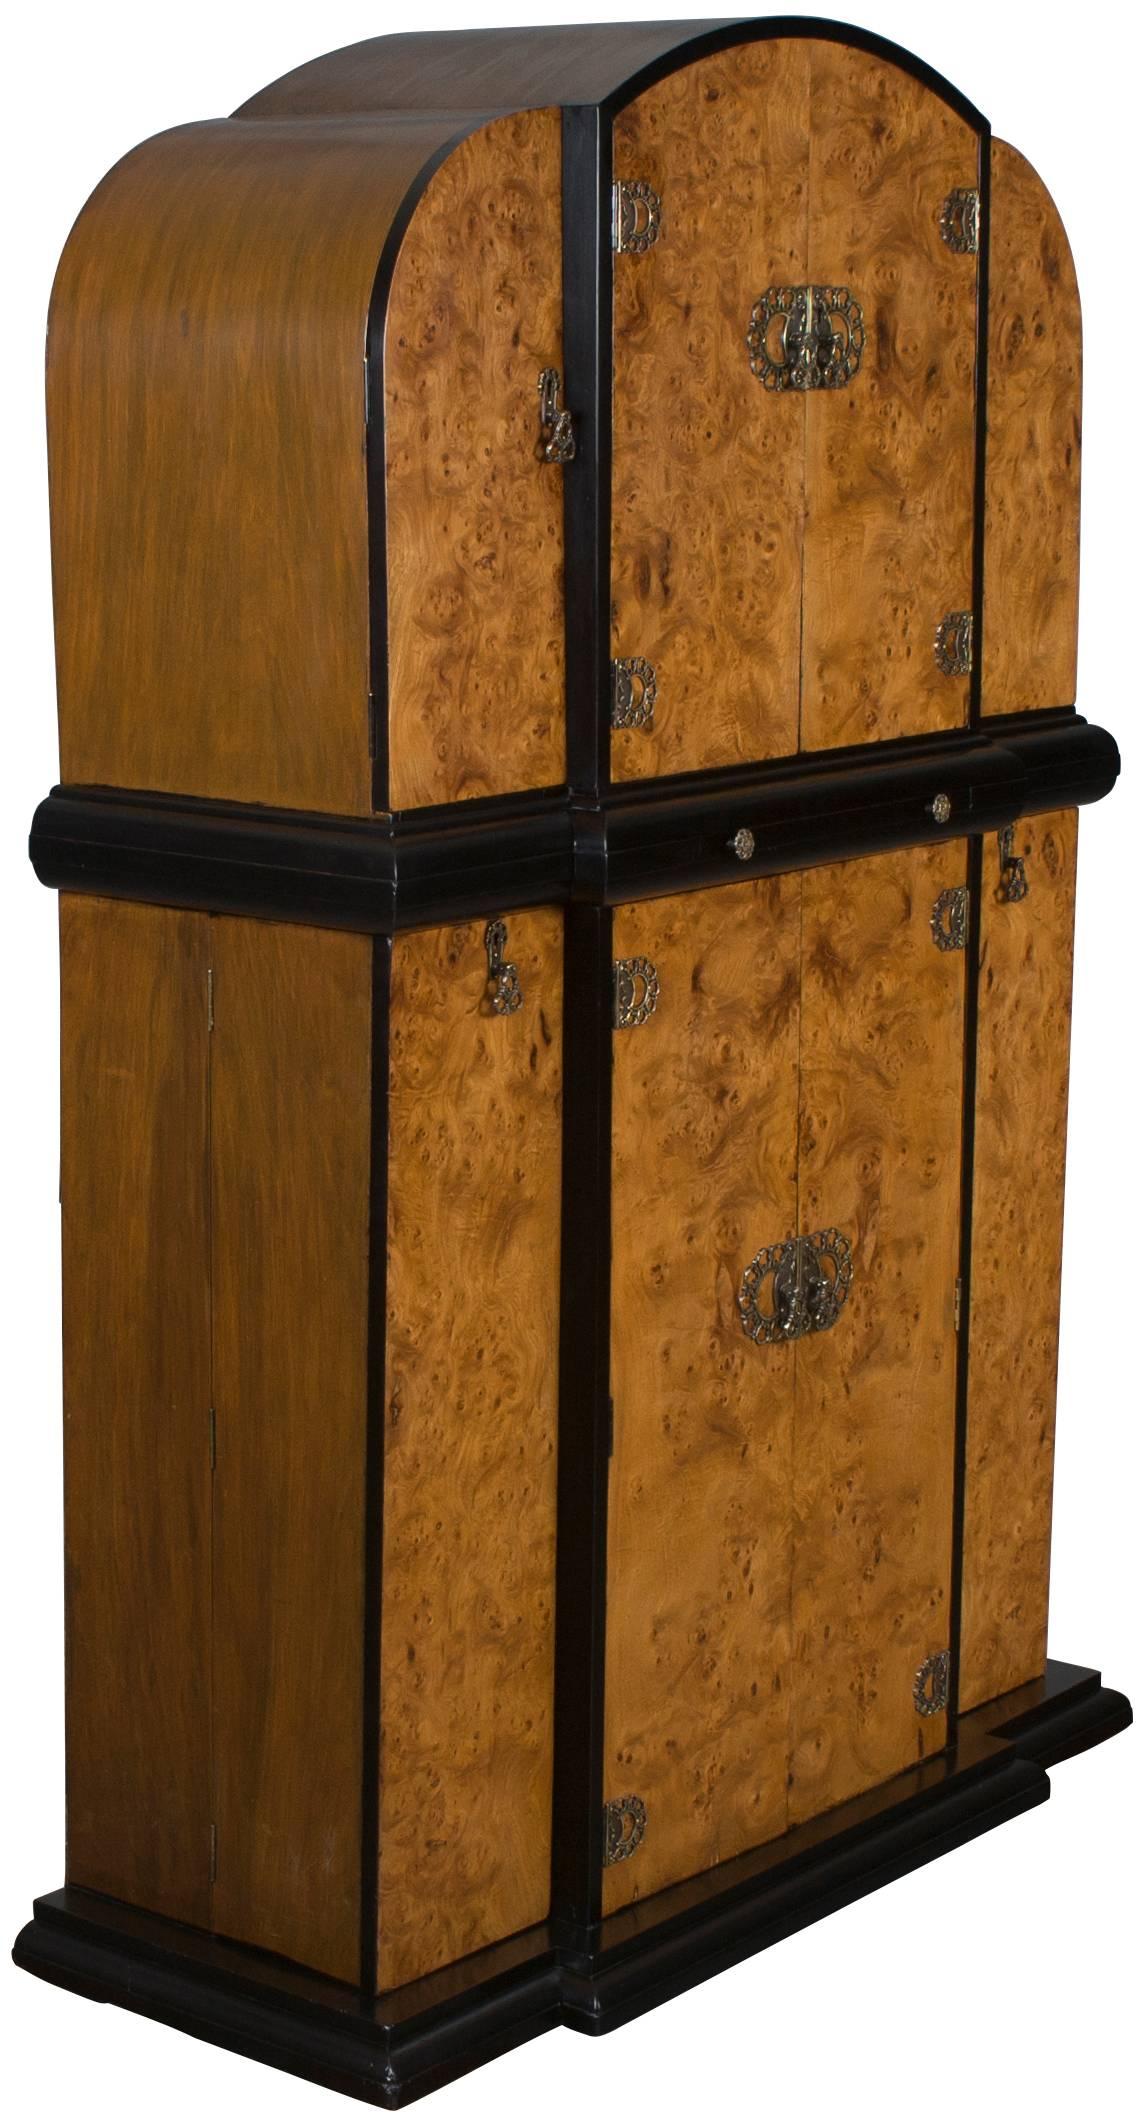 This is a very unique and beautiful Art Deco style bar that was made in England around the year 1940. The bird's-eye maple veneers are accented with painted black moldings that really define the Art Deco style. With six cabinet areas for storage,